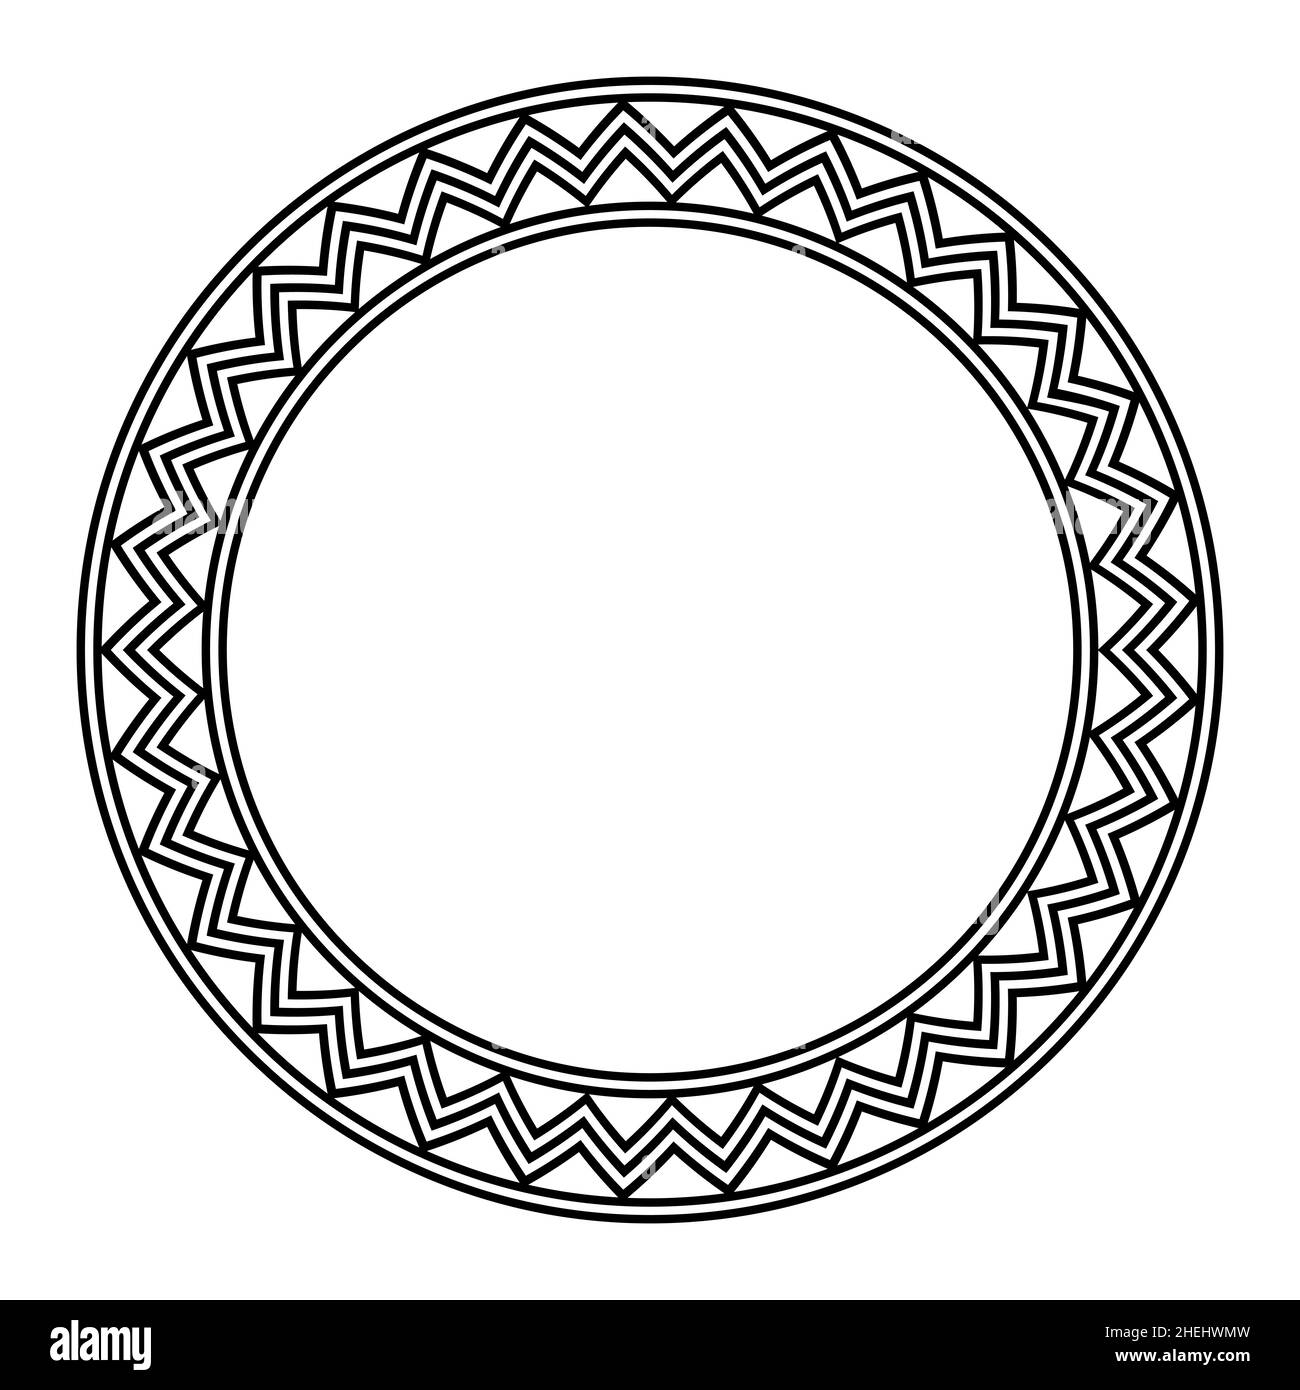 Circle frame, with a meander, made of a zigzag line pattern. Decorative, round border, made of three bold serrated lines, surrounded and framed. Stock Photo